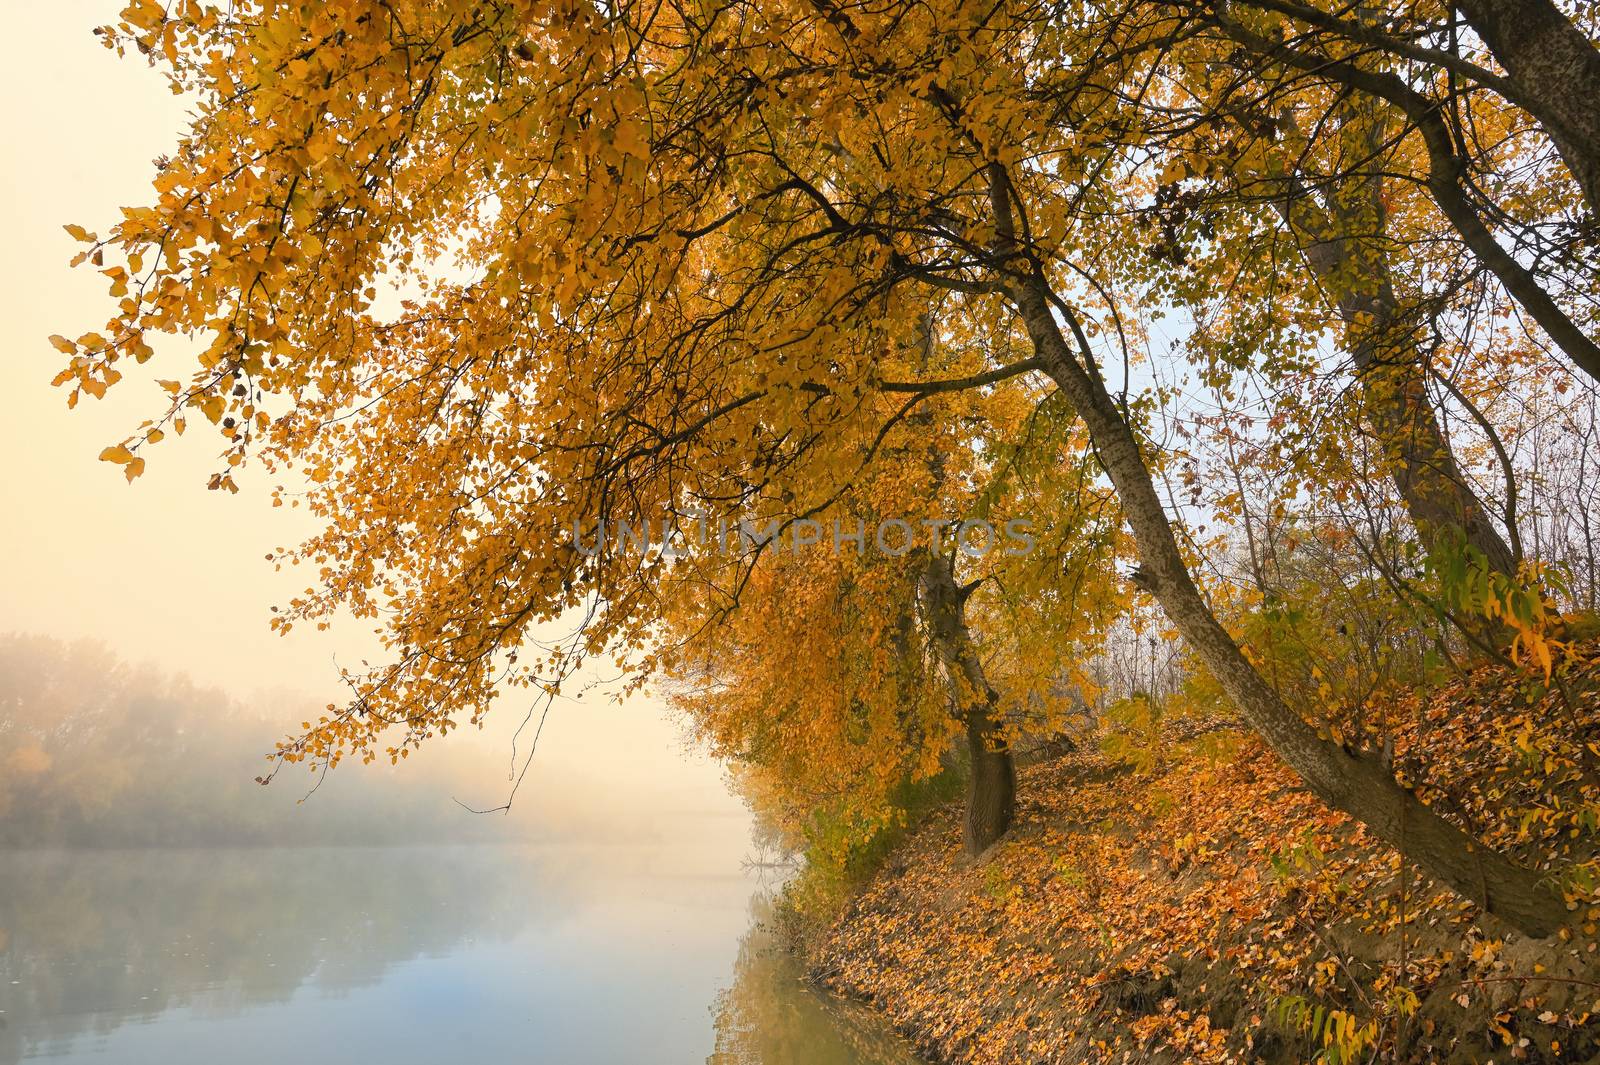 Foggy and Sunny Day on Siret river in Romania by mady70